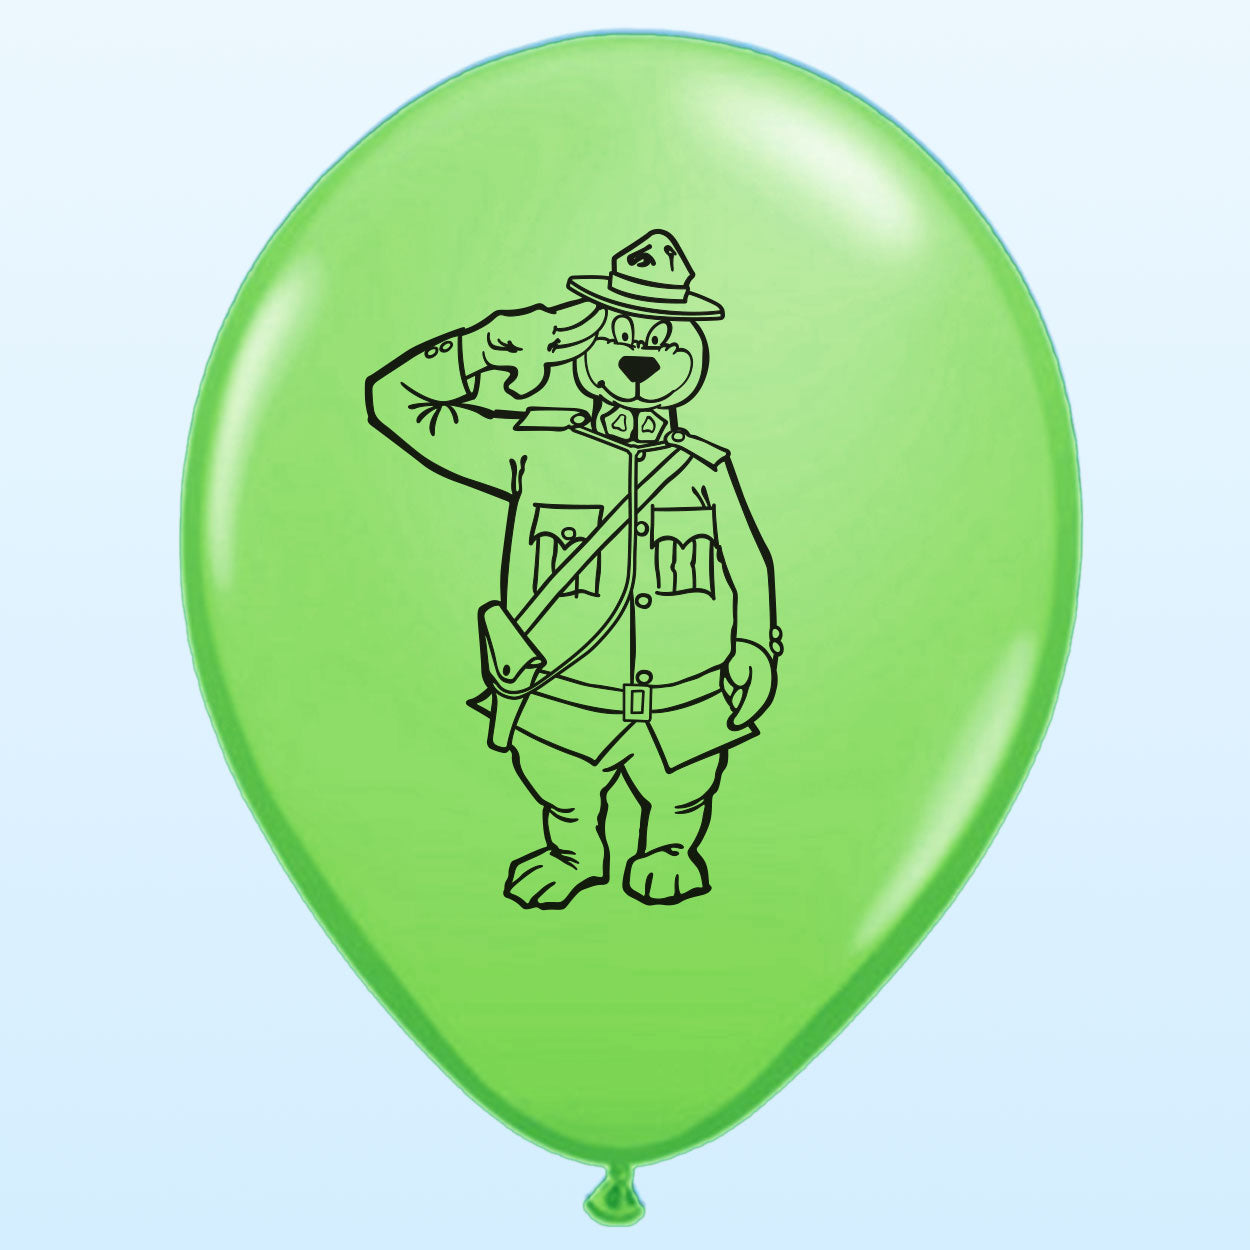 RCMP Branded Balloons